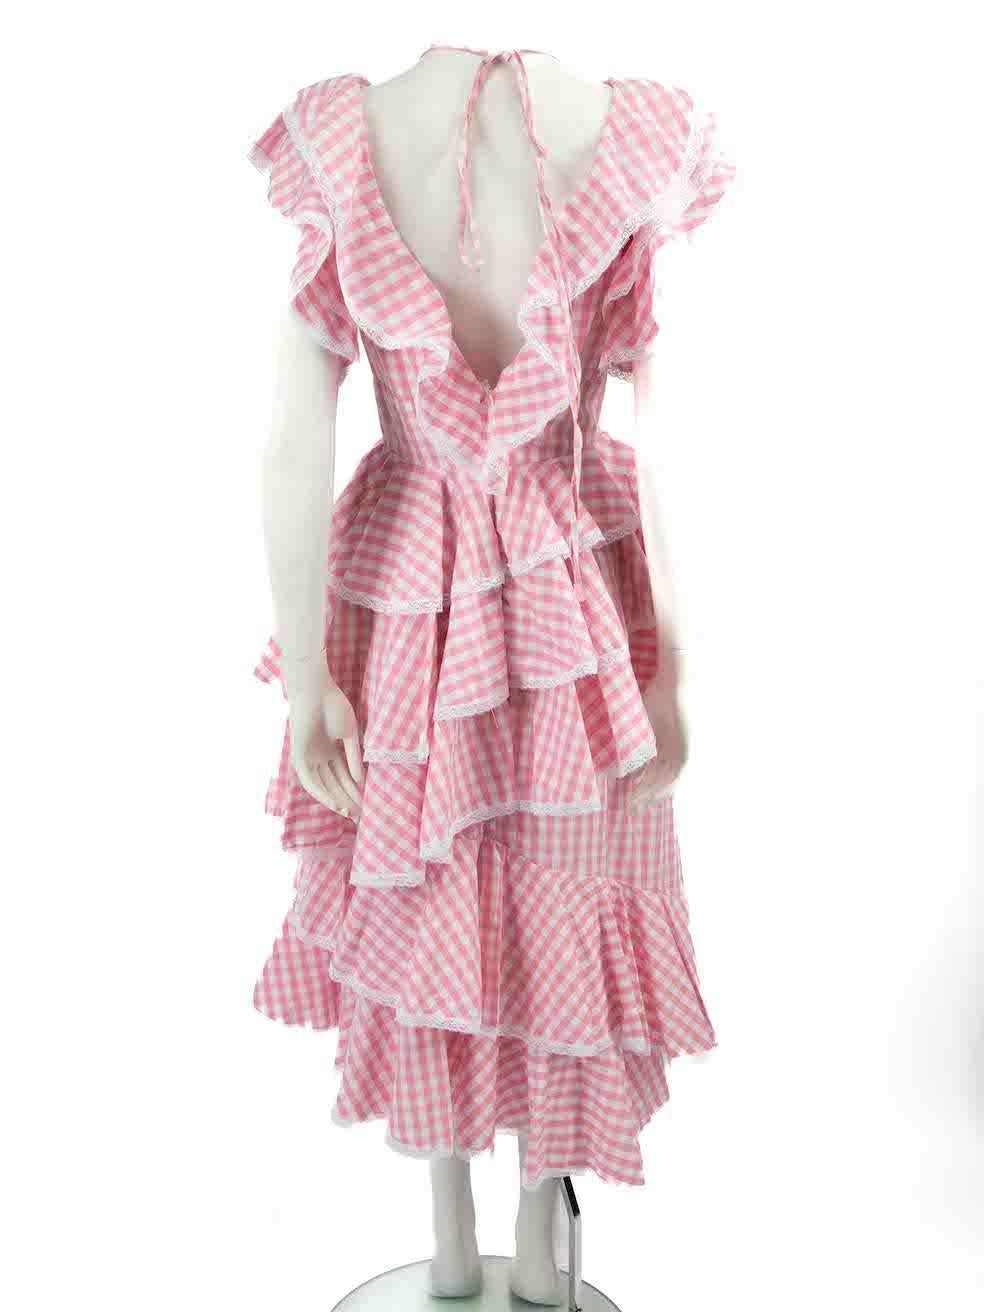 Milla Milla Pink Gingham Print Ruffled Midi Dress Size S In Good Condition For Sale In London, GB